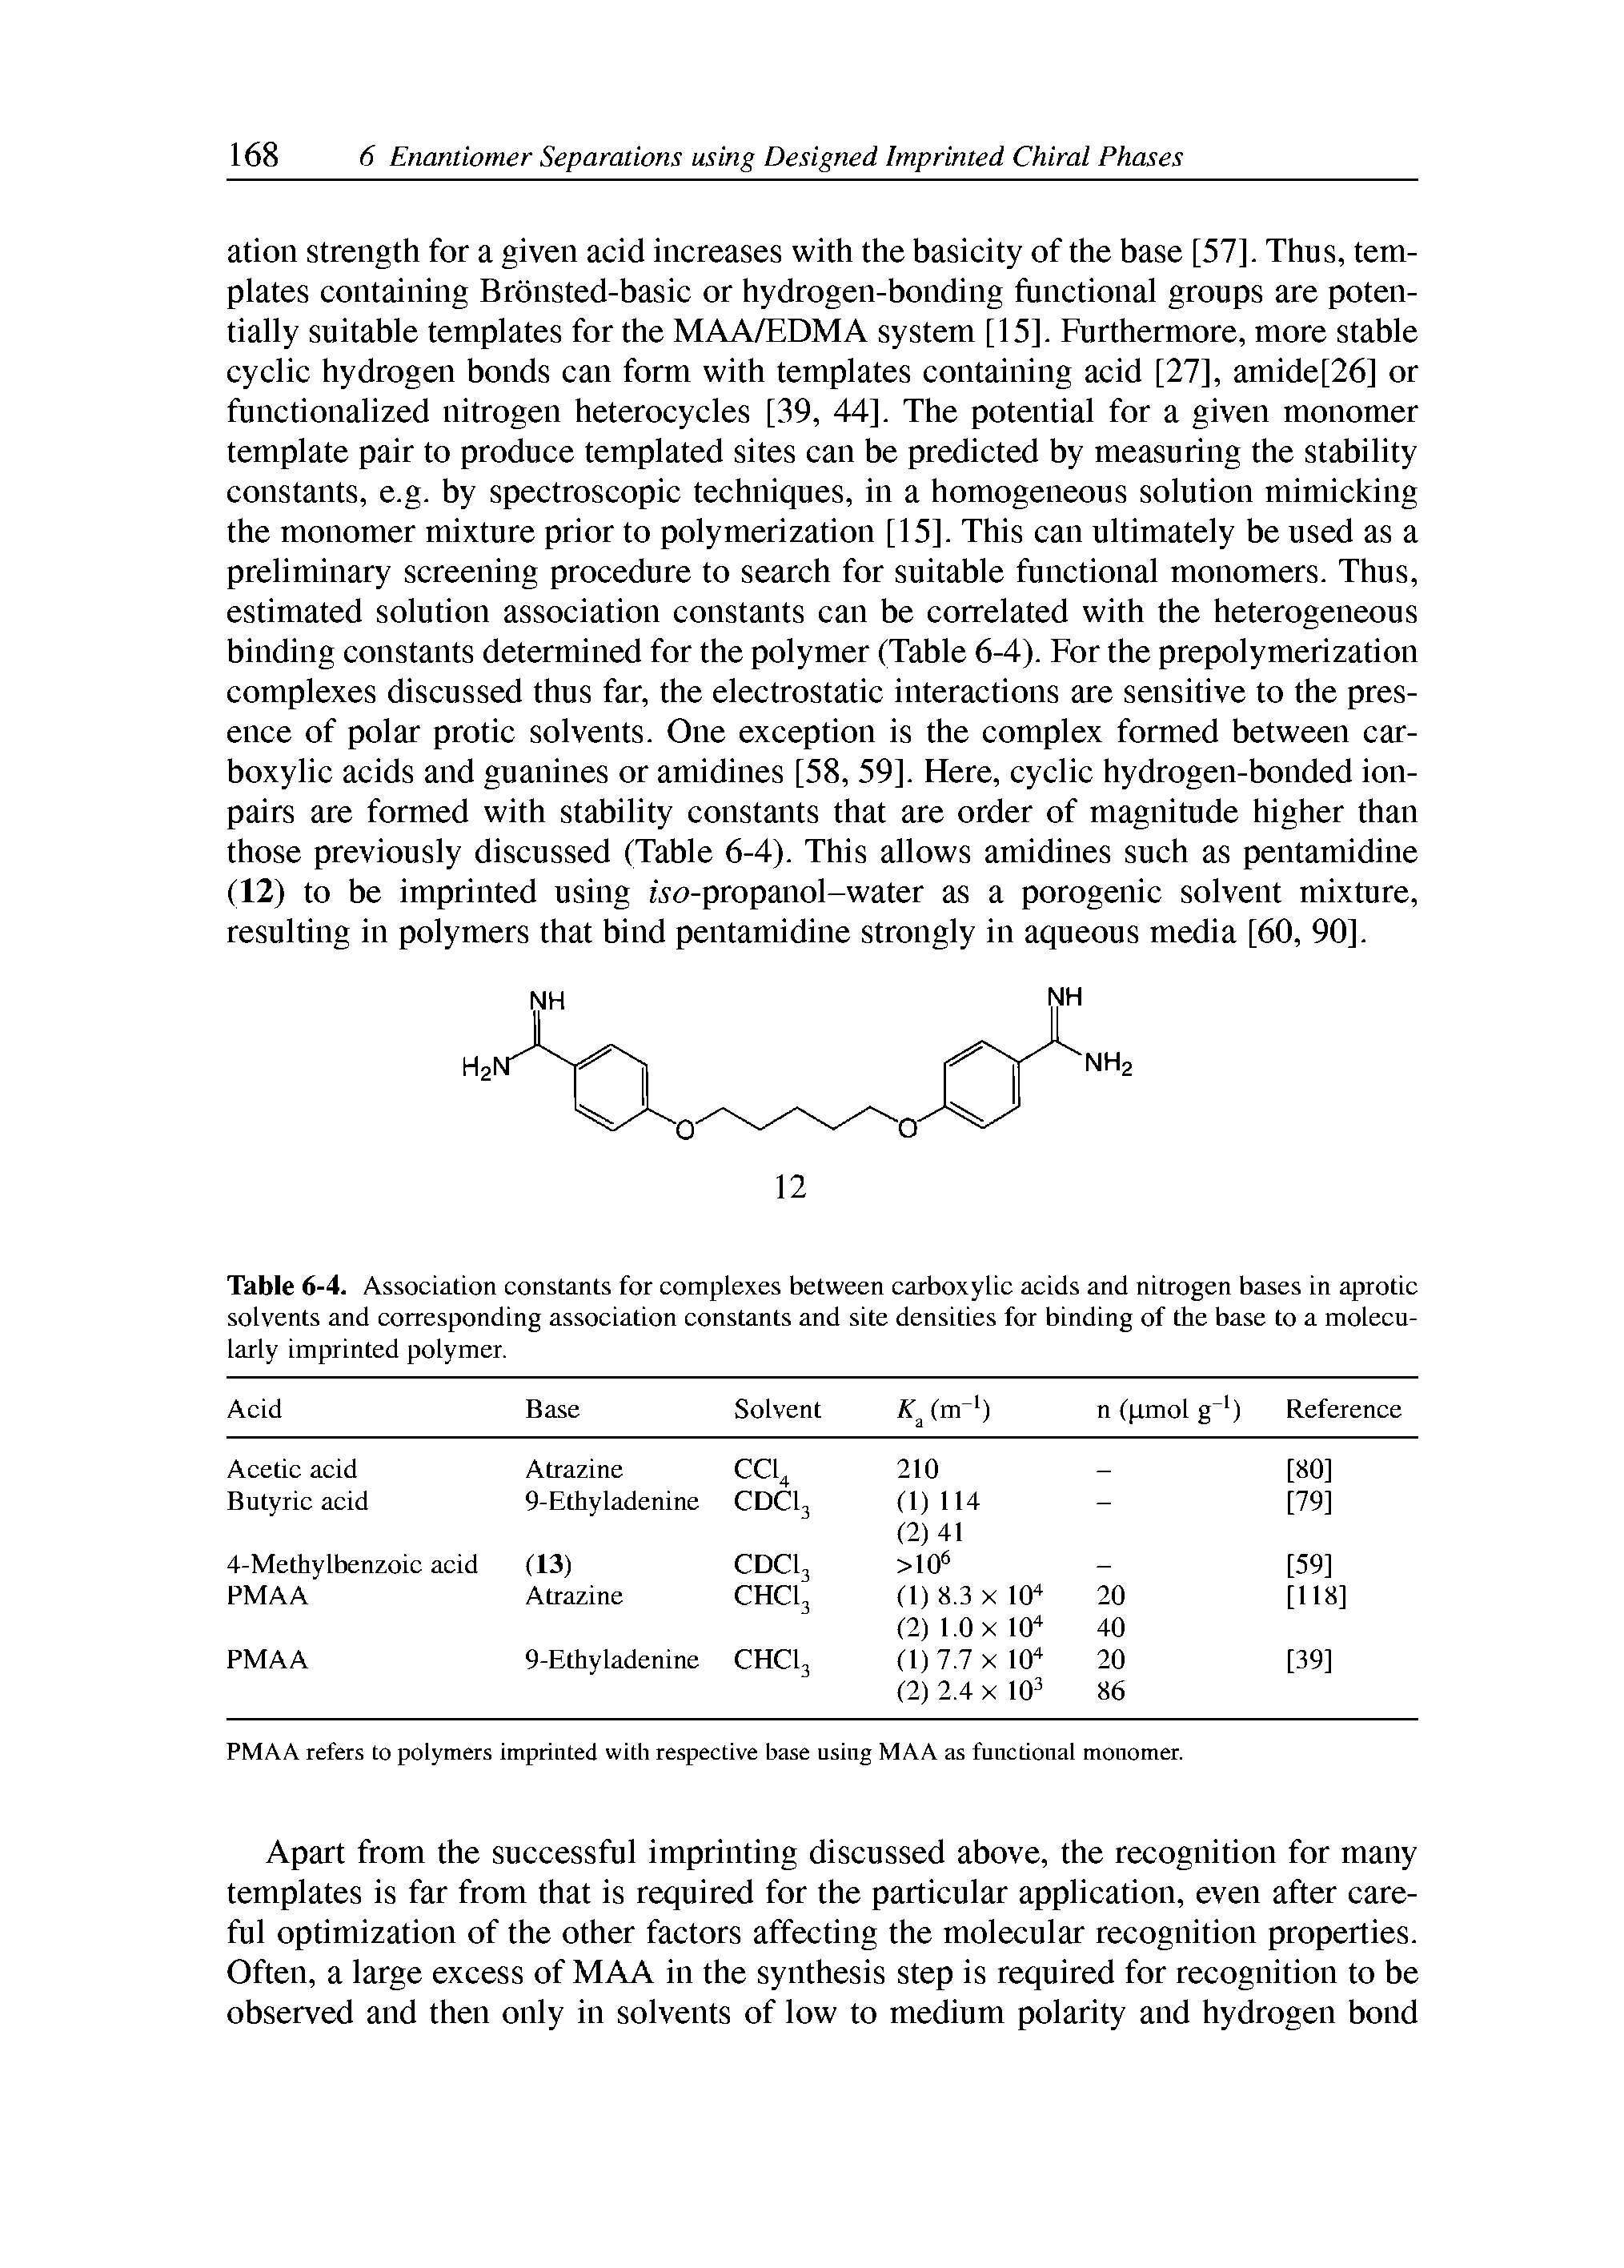 Table 6-4. Association constants for complexes between carboxylic acids and nitrogen bases in aprotic solvents and corresponding association constants and site densities for binding of the base to a molecu-larly imprinted polymer.